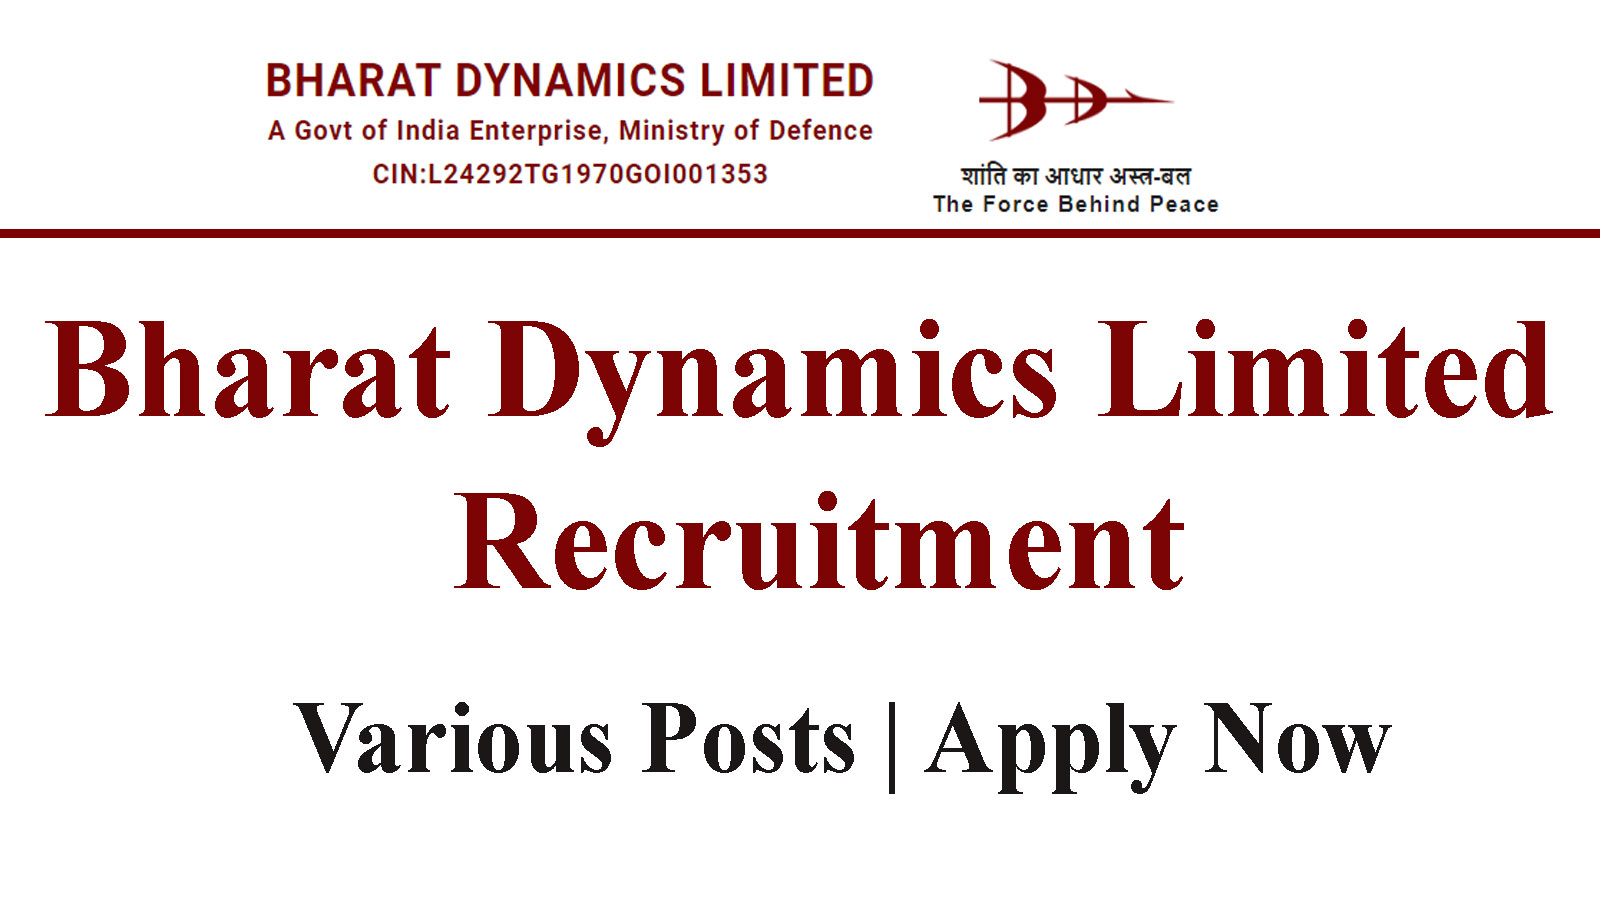 Bharat Dynamics Limited Recruitment, Check Eligibility and Apply Online